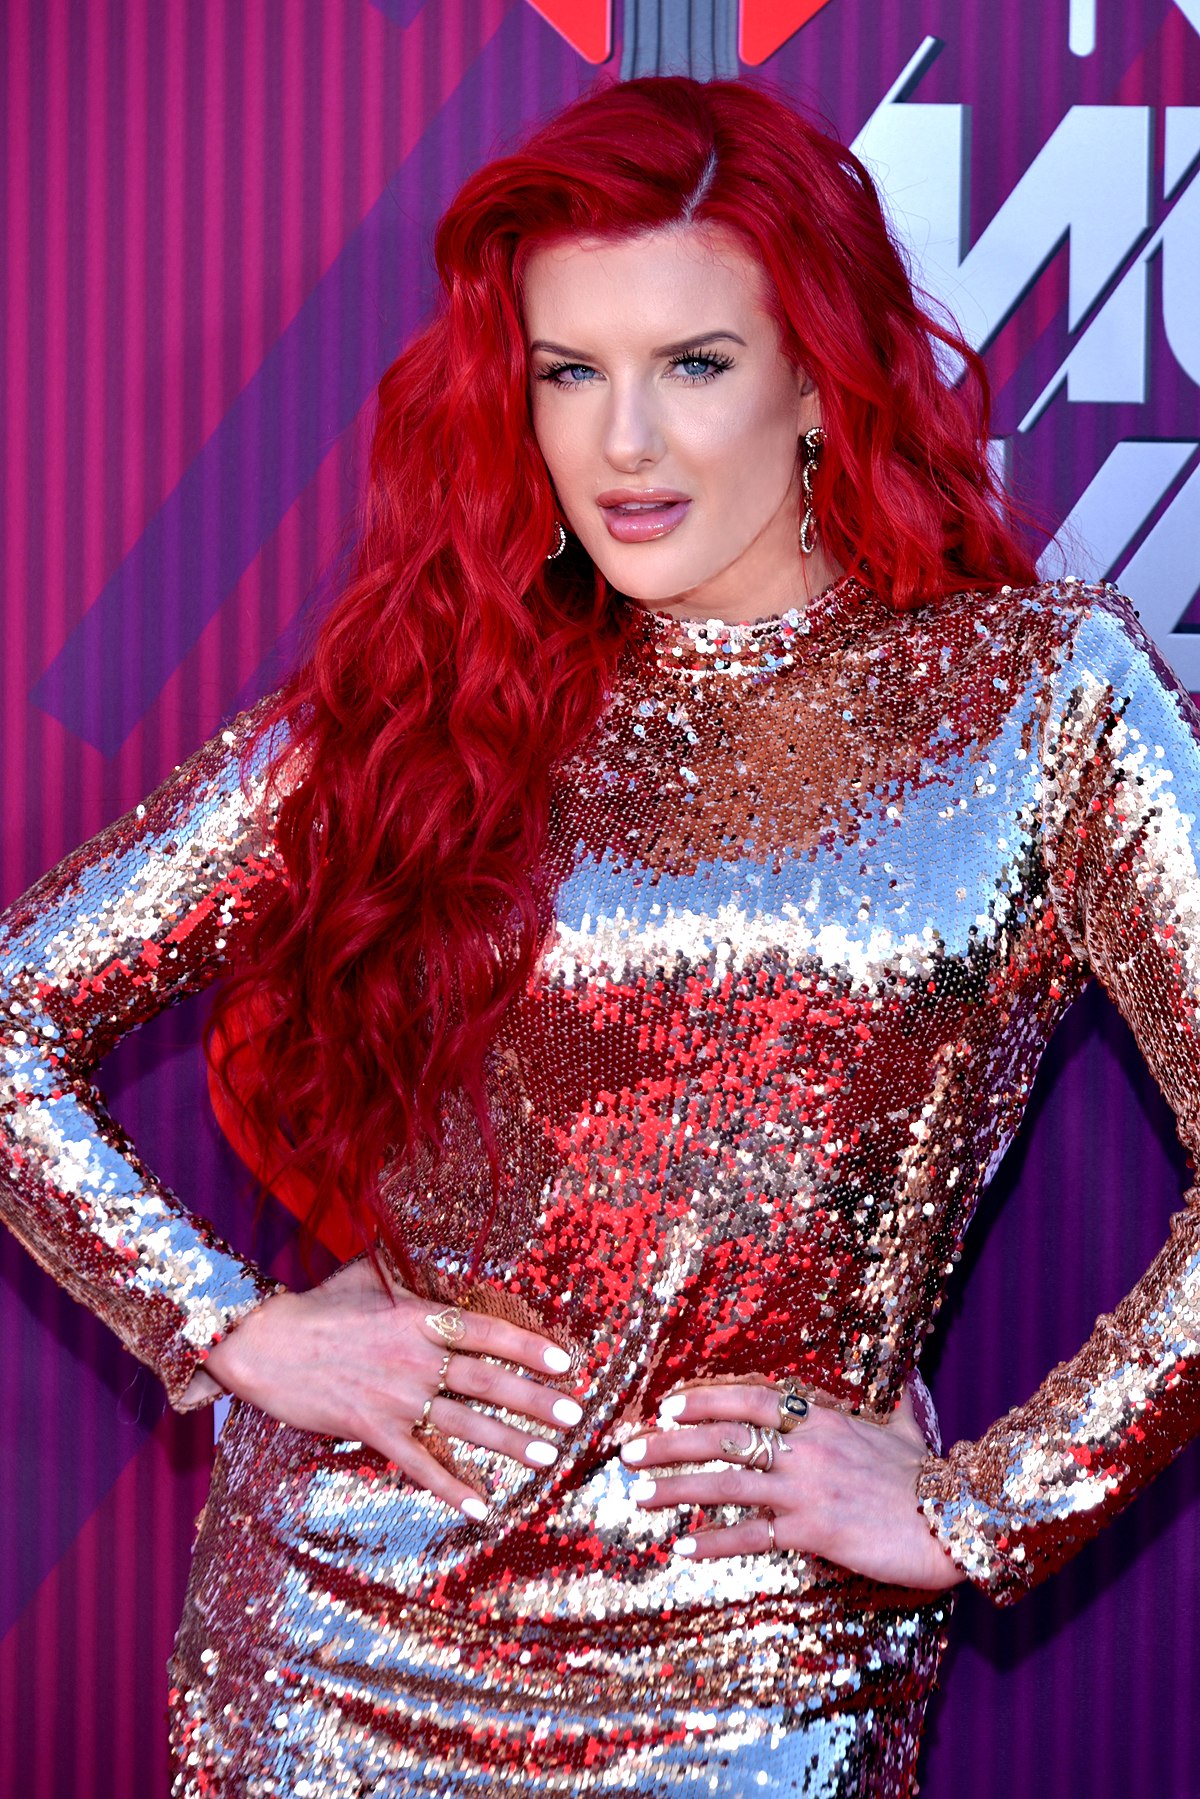 Justina valentine dating who is Who is